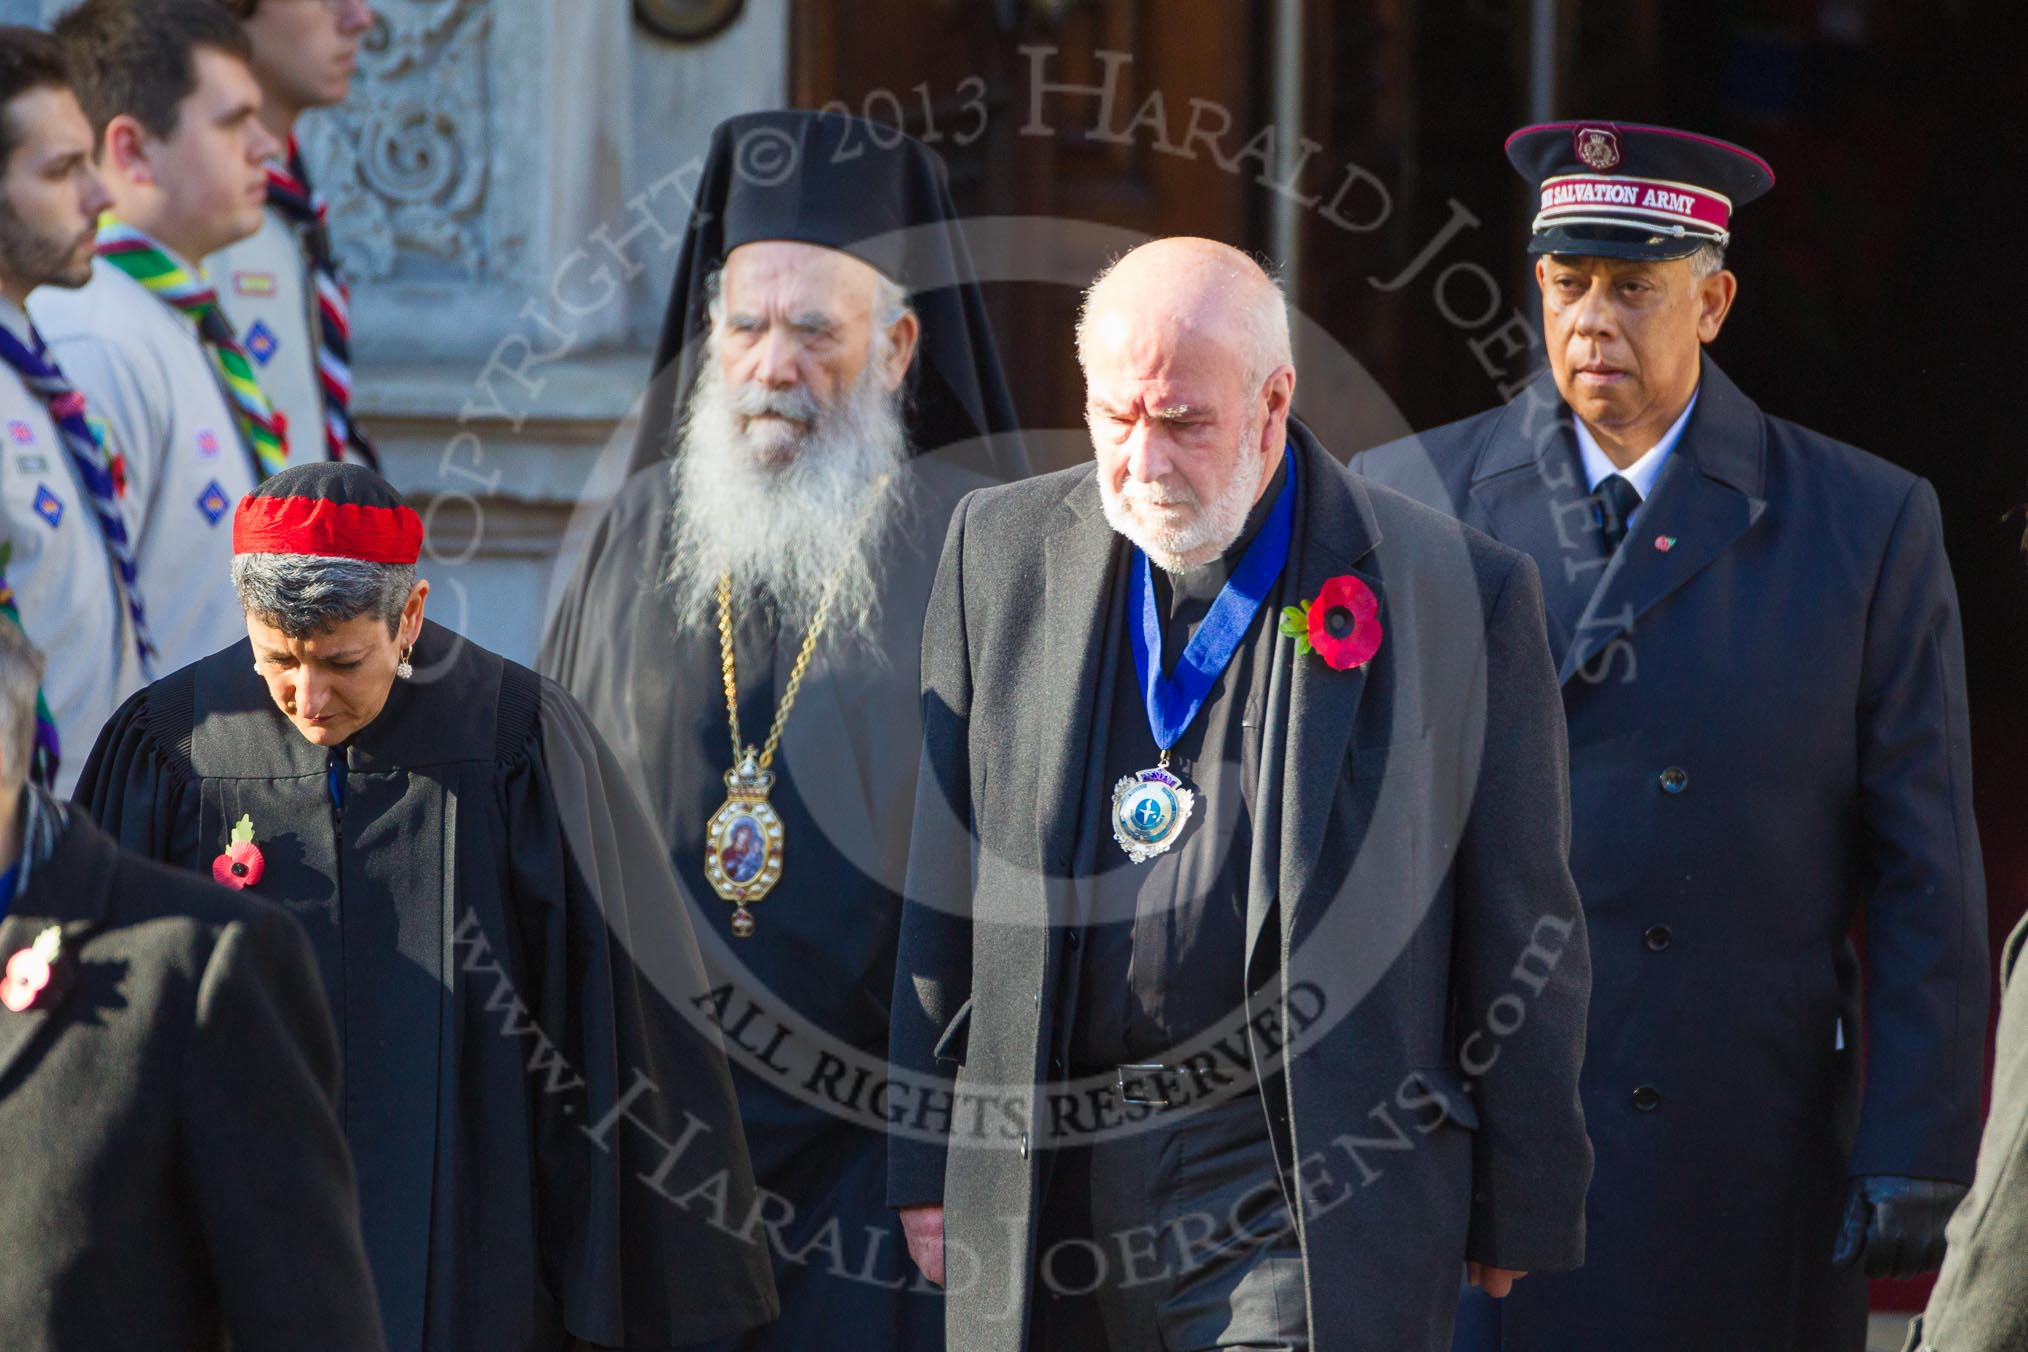 The Faith Communities: The Reverend Bill Darlison, Rabbi Laura Janner-Klausner, Commissioner Clive Adams, His Eminence The Archbishop Gregorios of Thyateria and Great Britain.